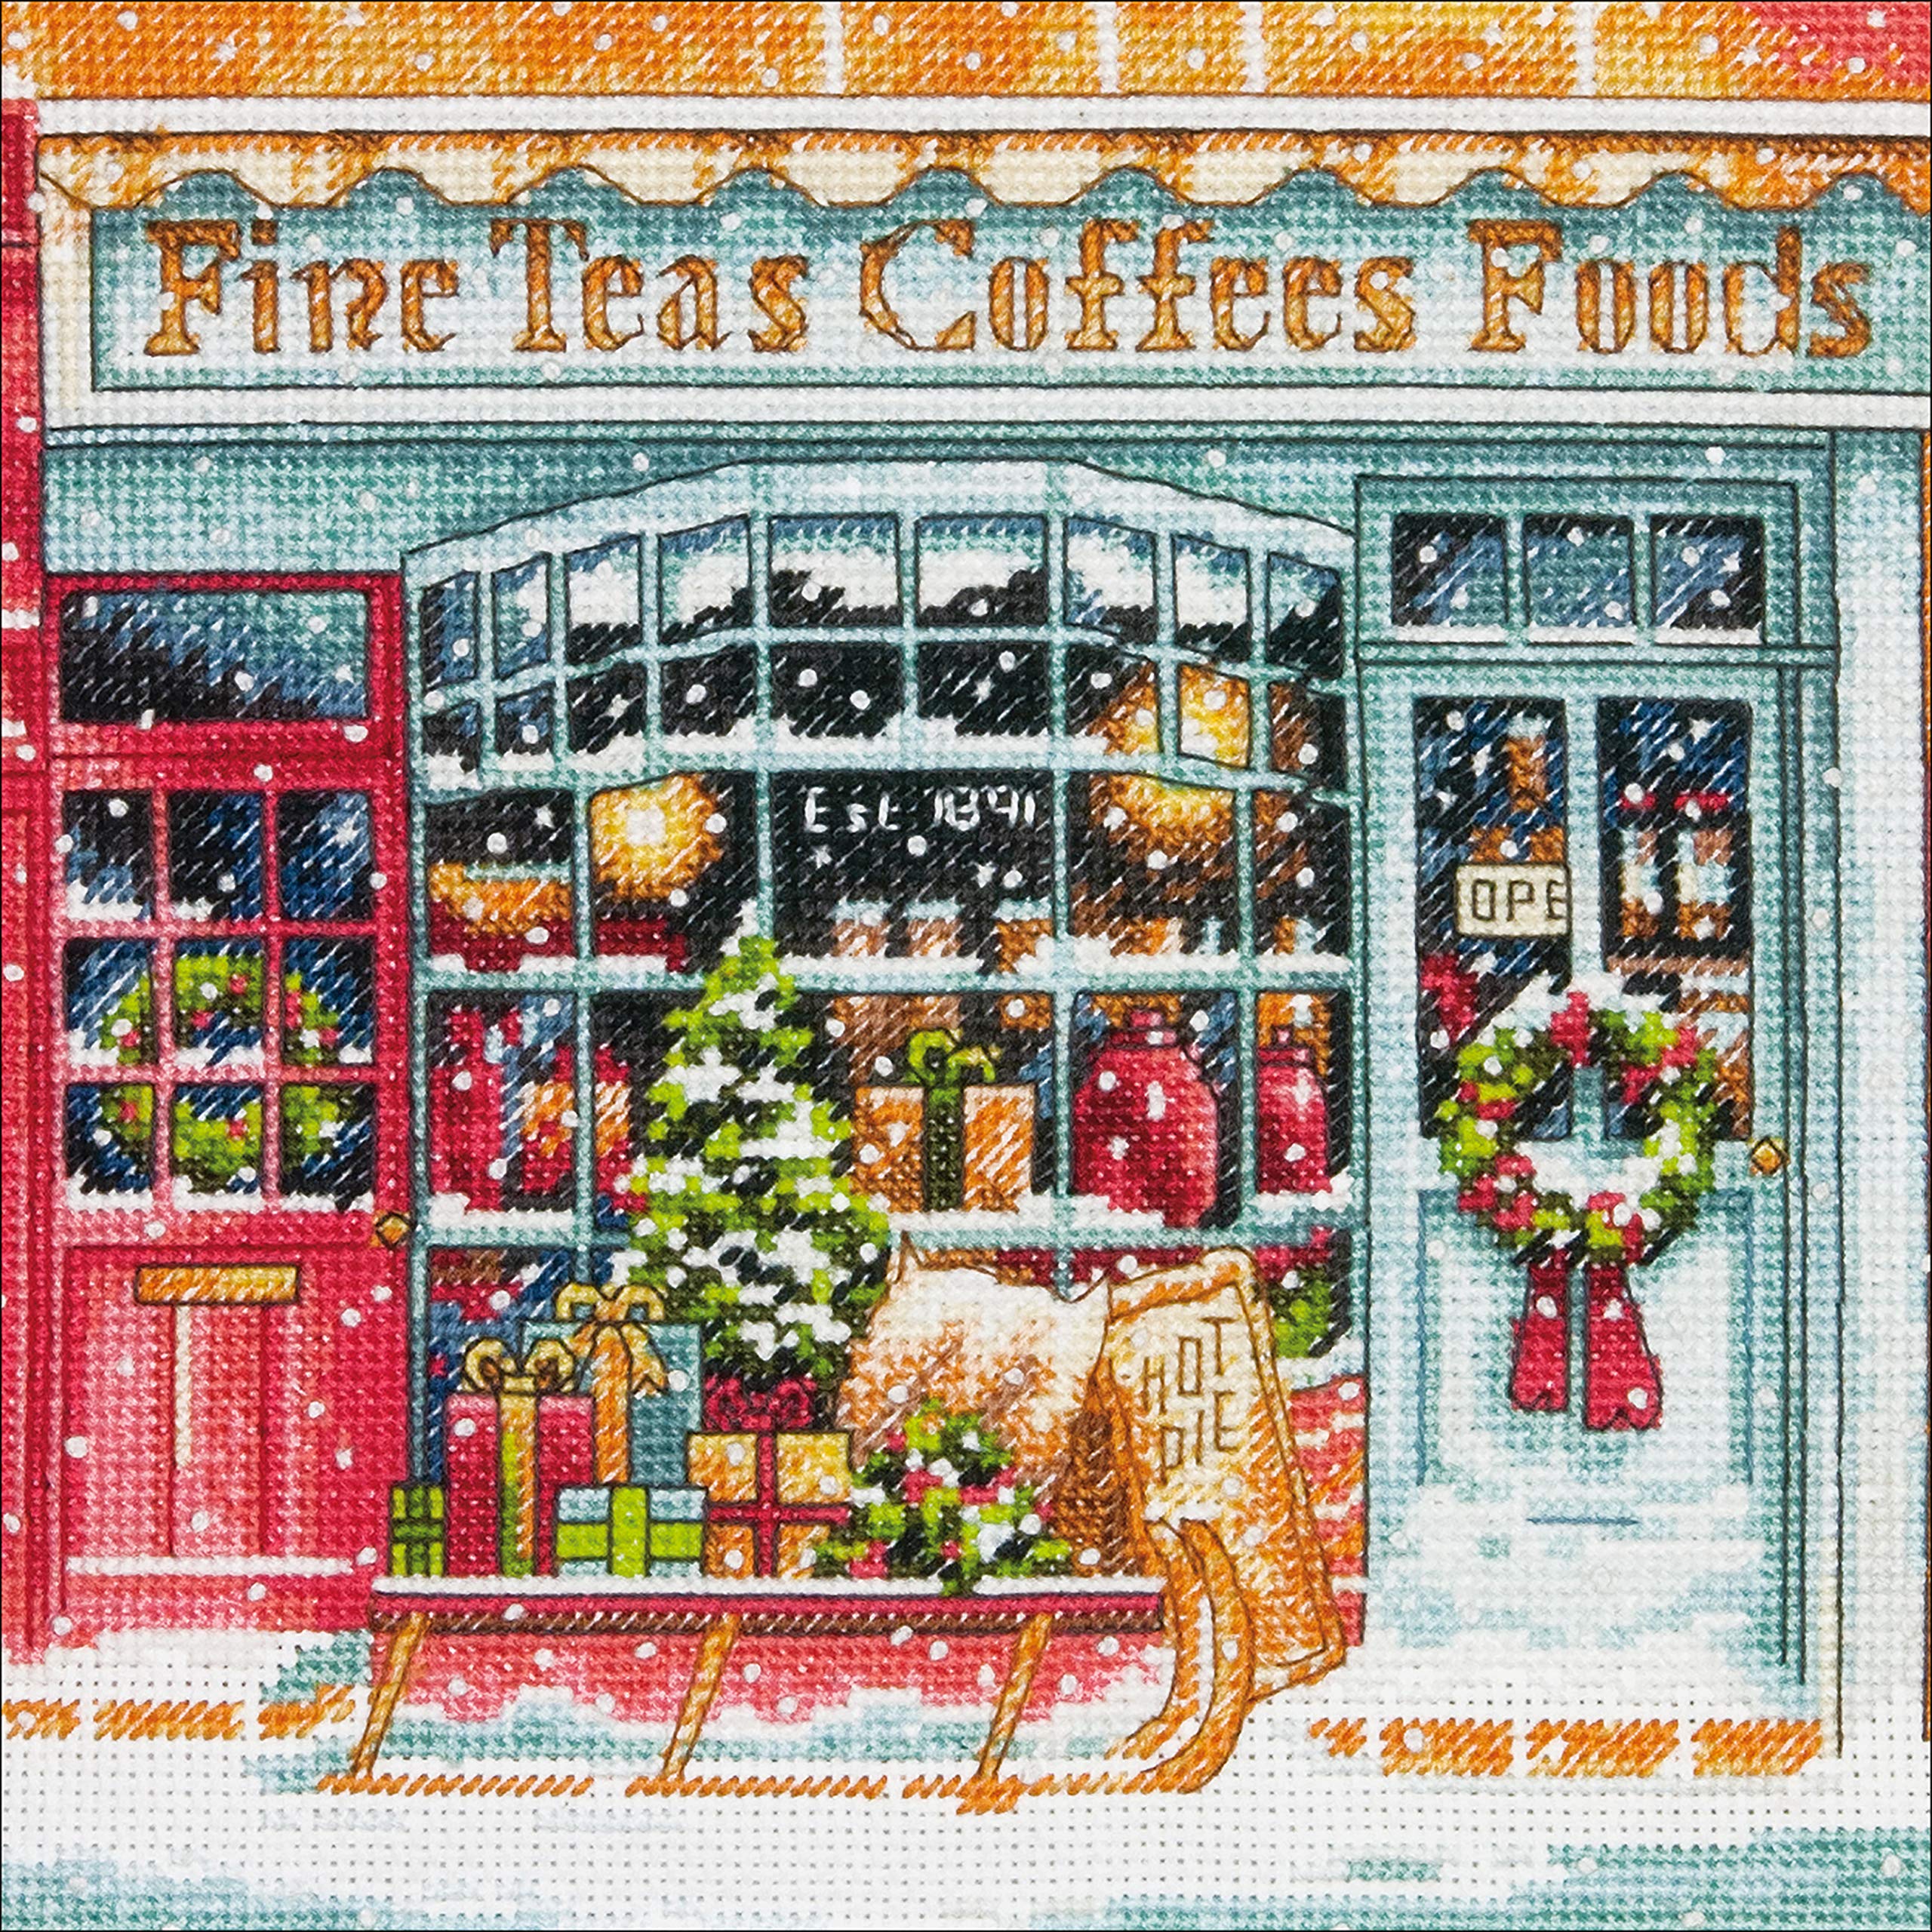 Dimensions Gold Collection Small Counted Cross Stitch Kit, 'Coffee Shoppe', 18 Count White Aida Cloth, 6'' x 6'', Black